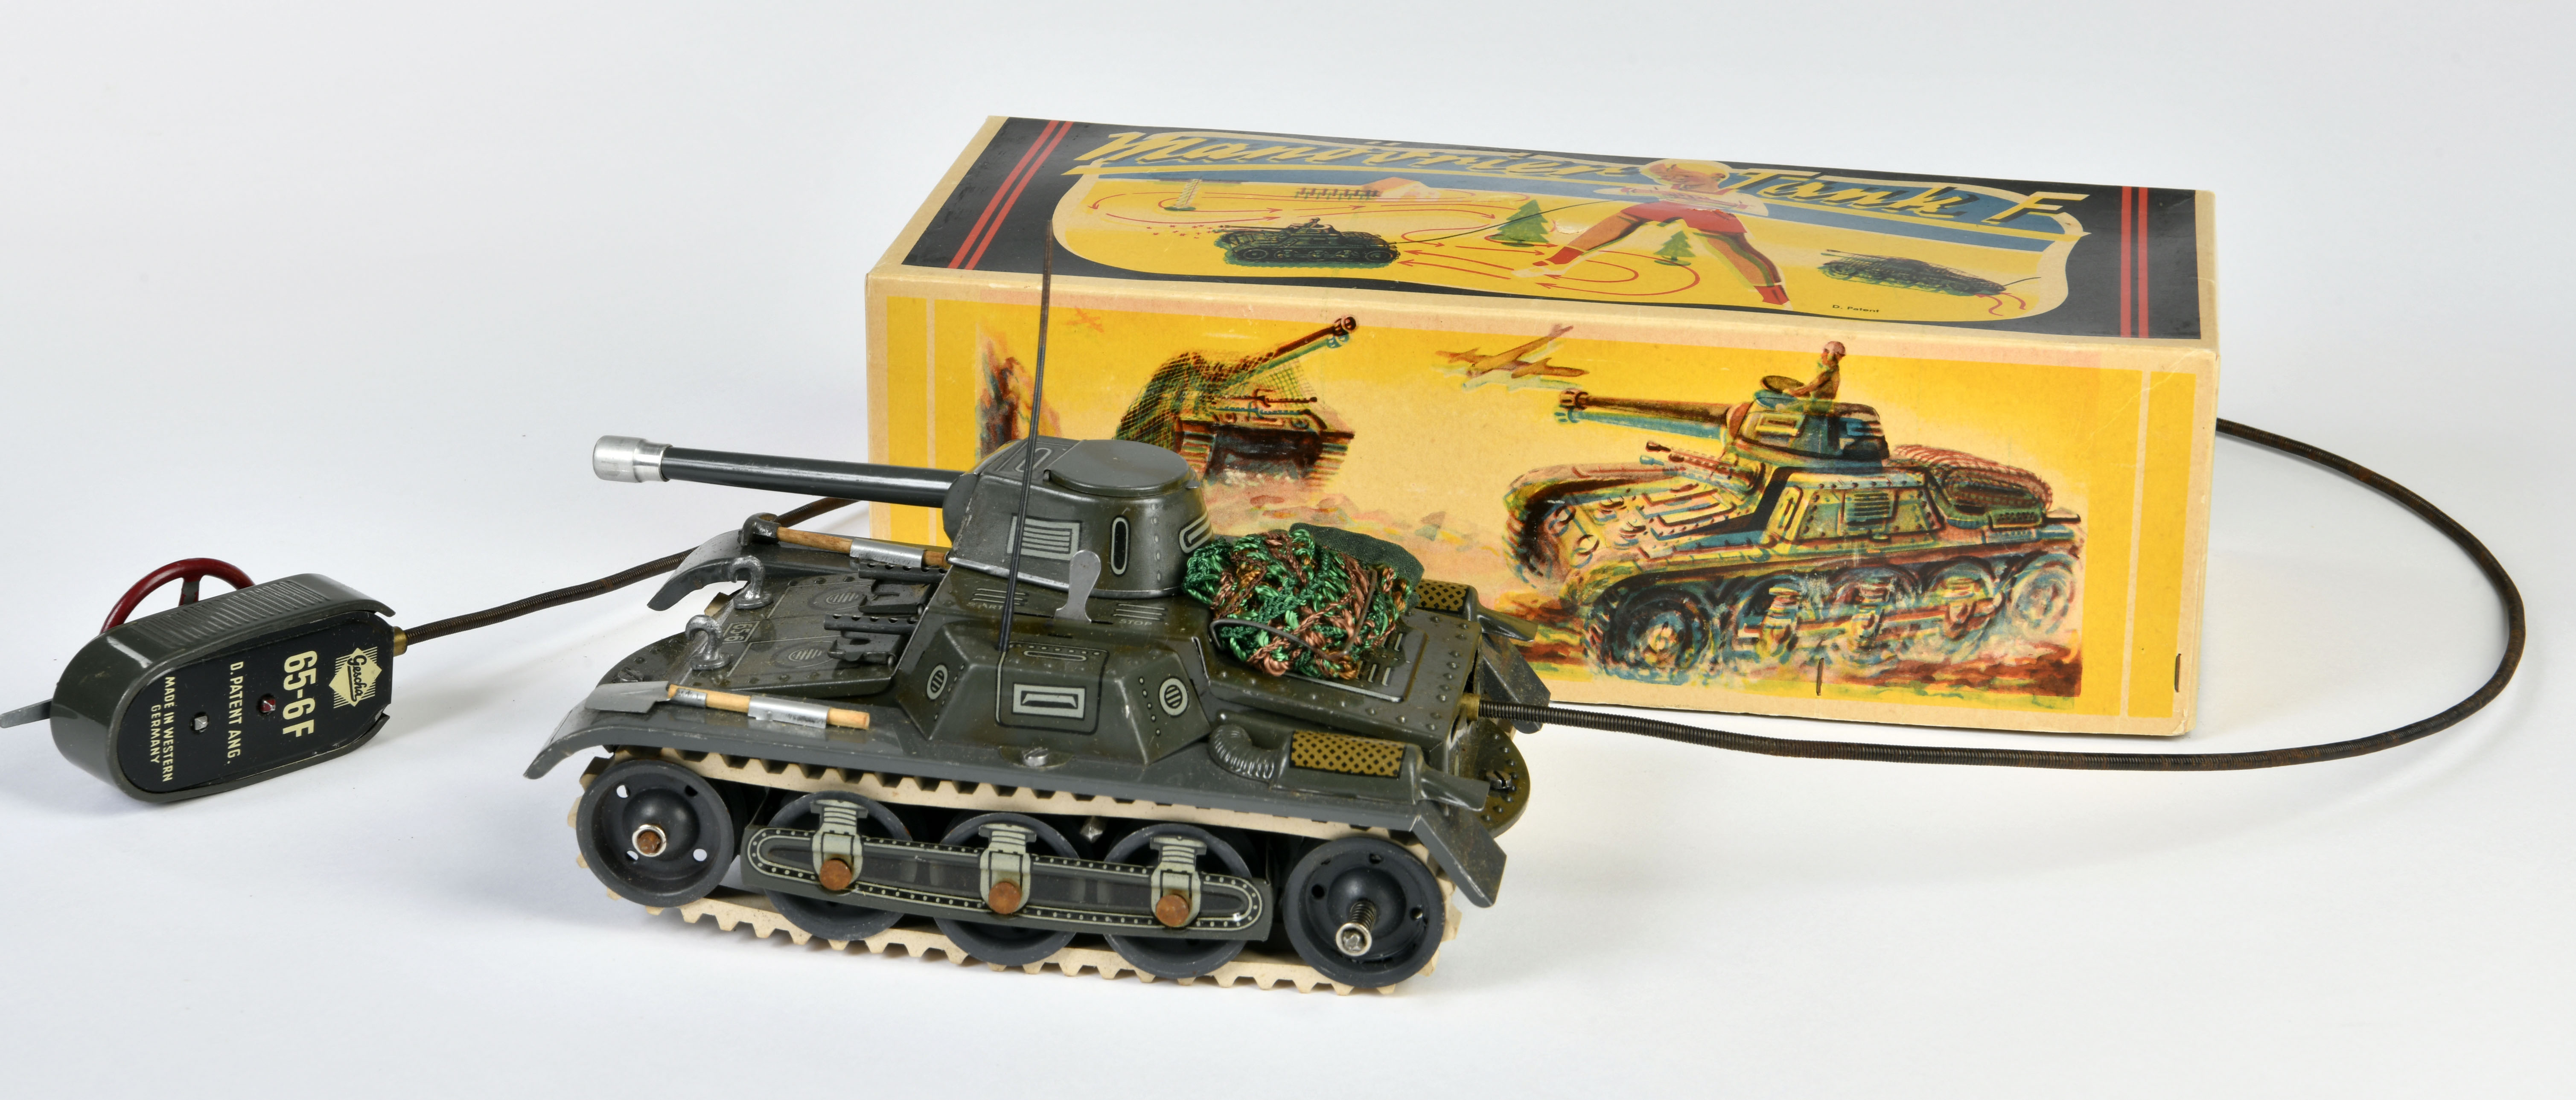 Gescha, Manoeuvre Tank with remote control, W.-Germany, 20 cm, tin, function ok, box C 1, C 1- - Image 2 of 4